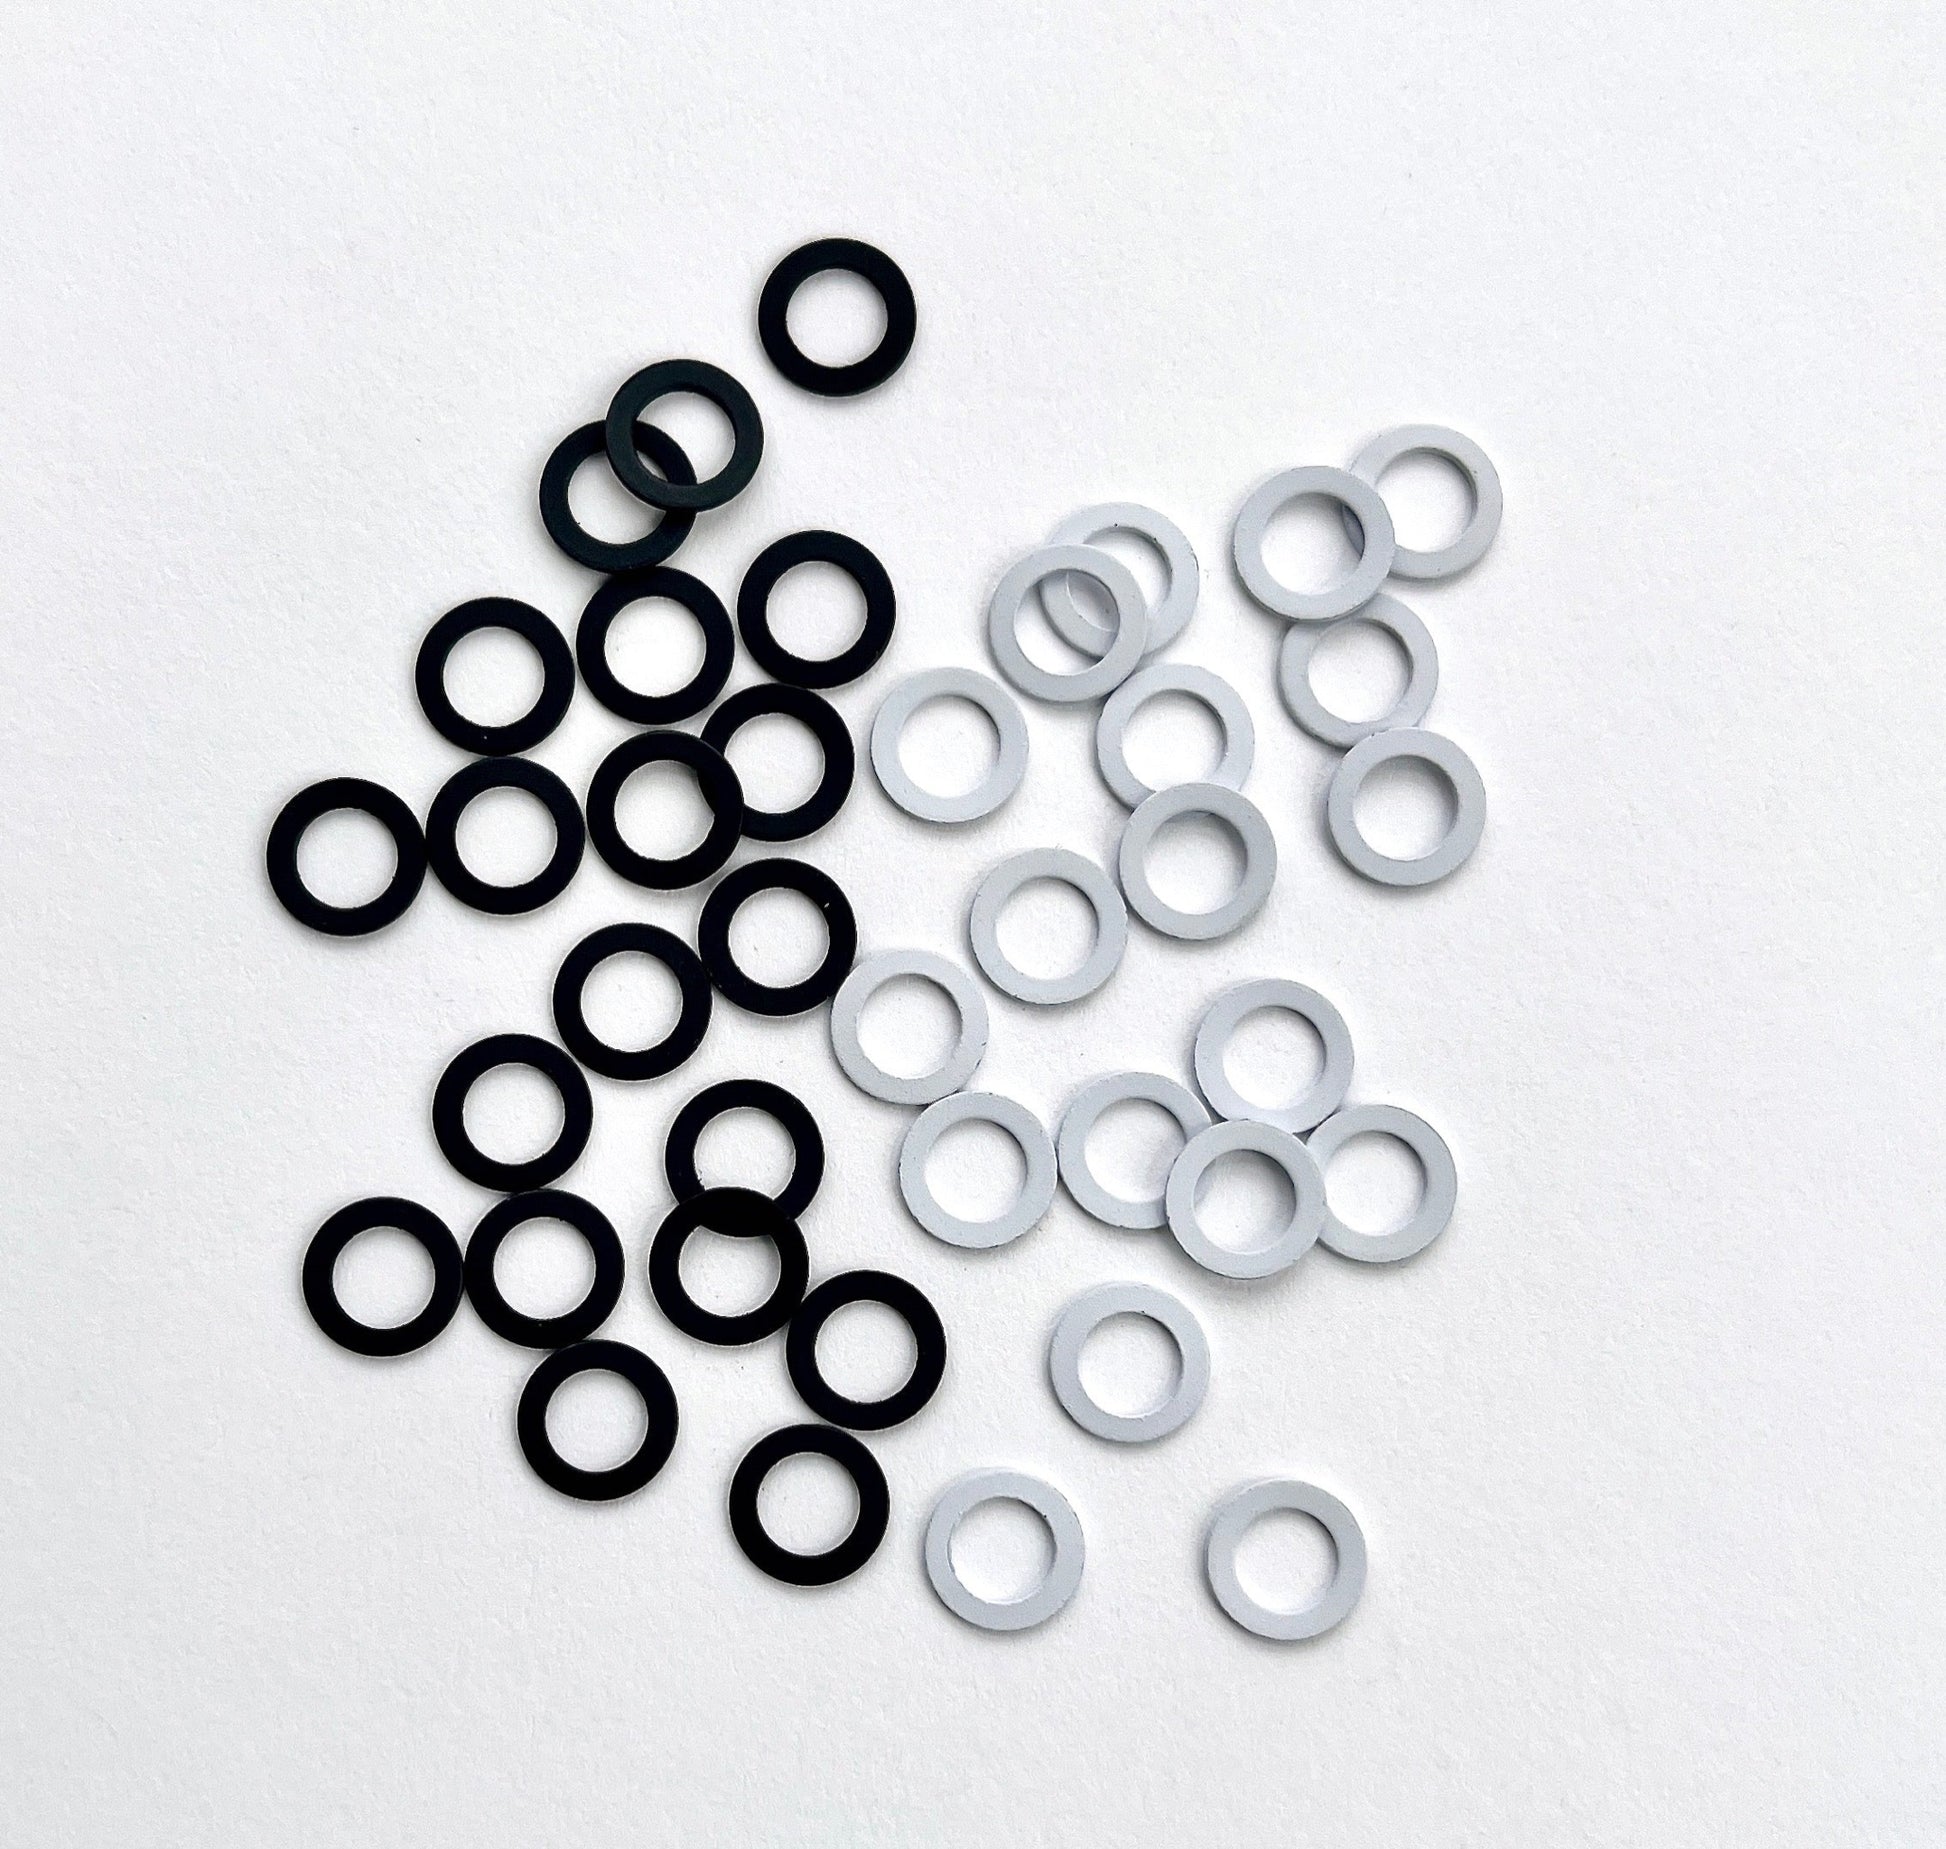 Small metal ring with 6mm internal diameter, Flat Metal Ring. For use within bra making and swimwear. Can be used to make adjustable straps too! White ring or black ring